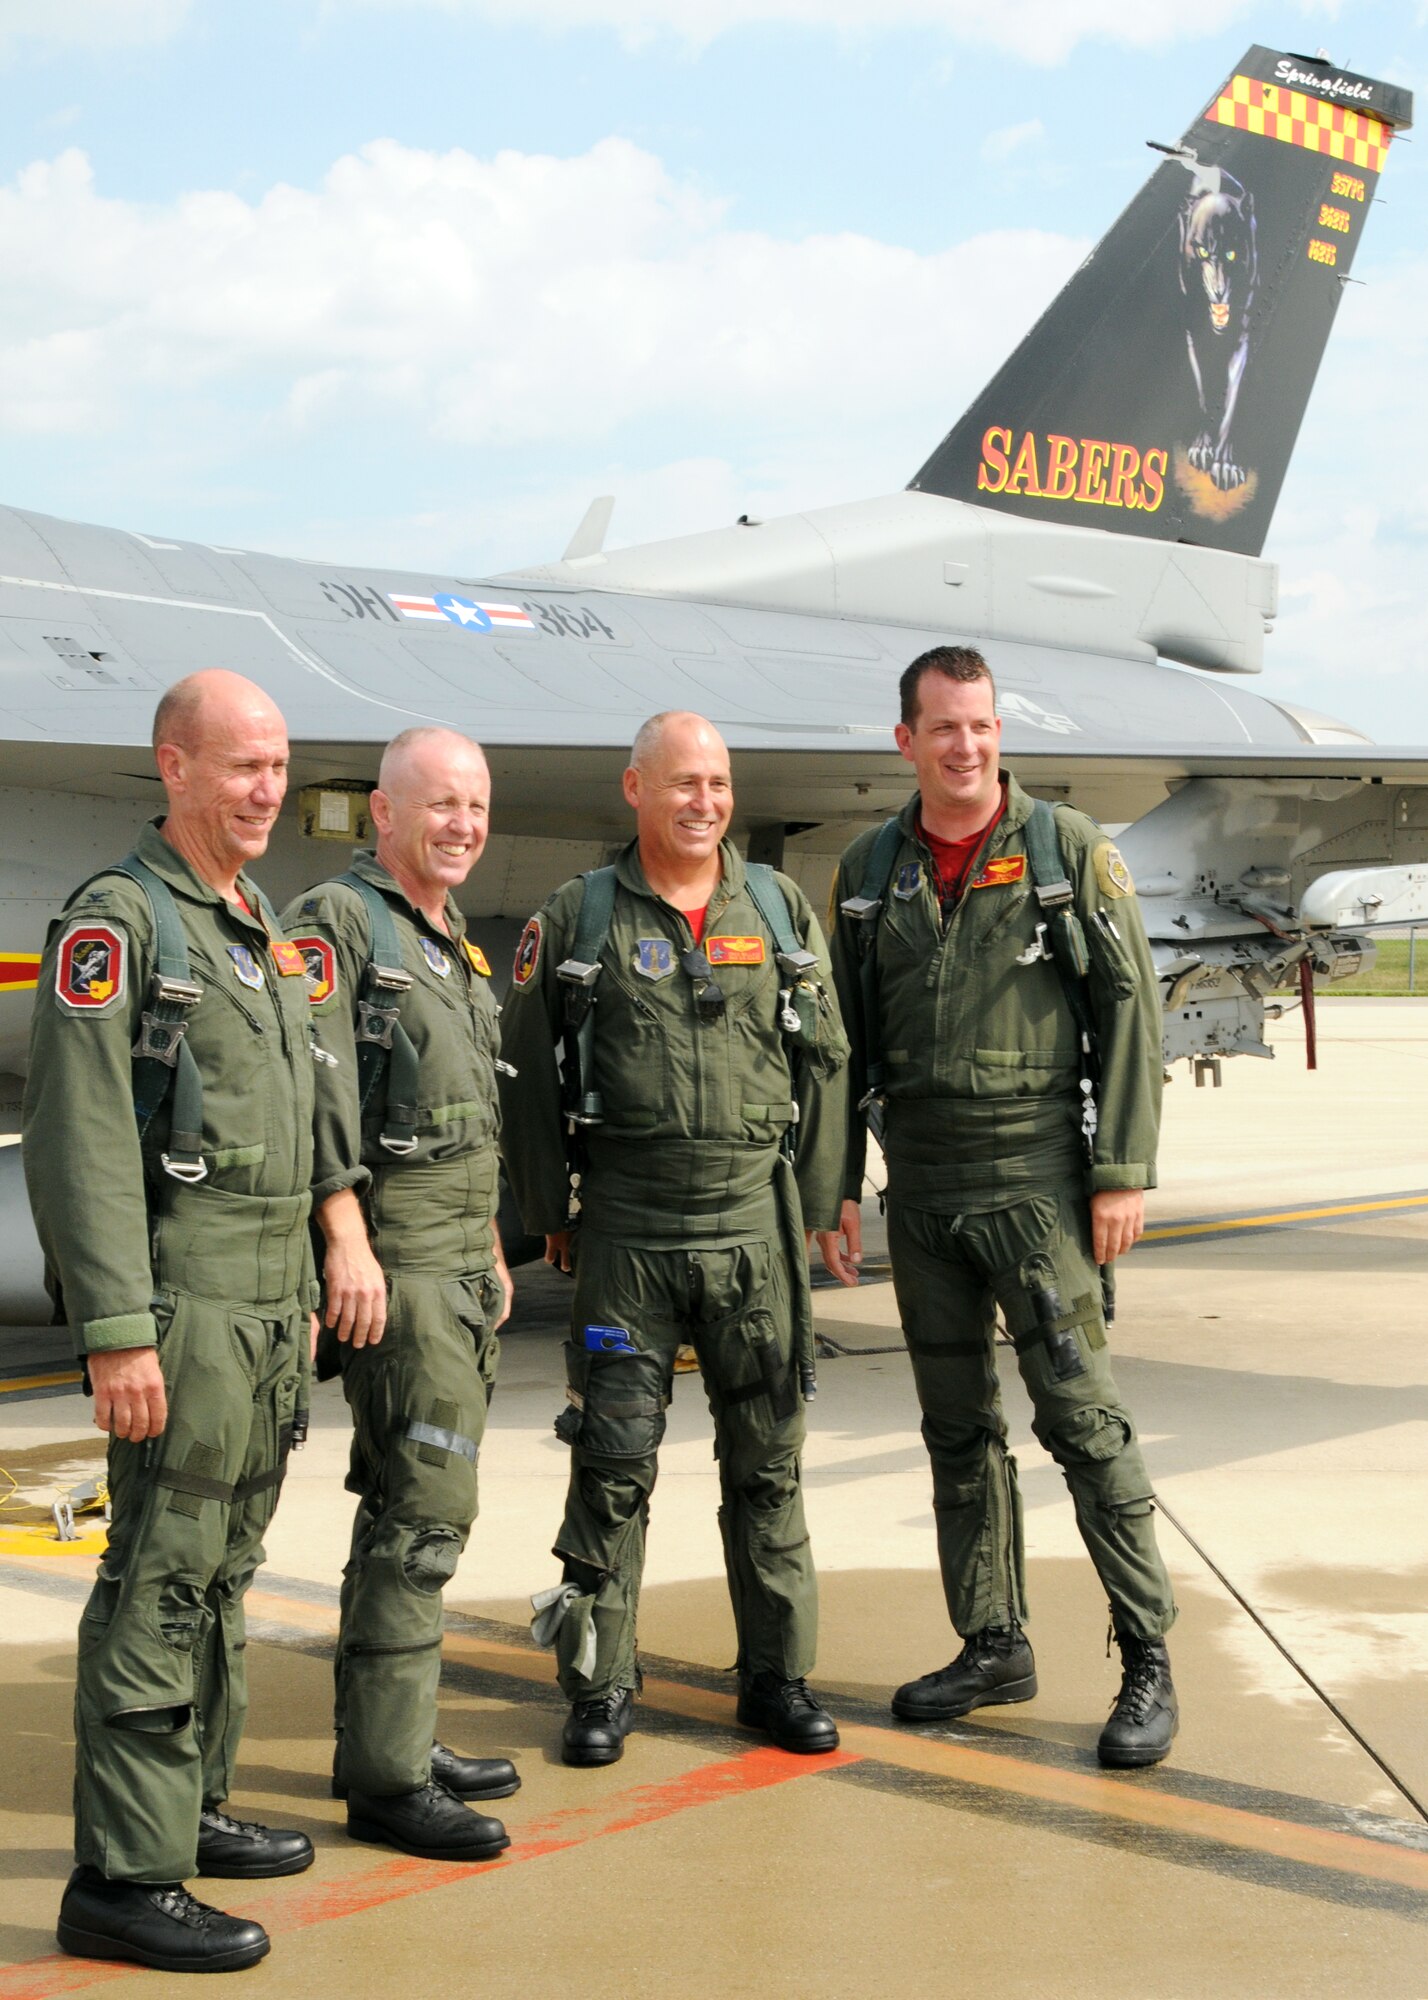 Col. Harry M. “Mike” Roberts, Lt. Col John Thompson, Col. Craig Wallace, Lt. Col Nathan Thomas pose in front of a F-16 after their final flight at Sprinfield Air National Guard Base on July 30, 2010.  The four pilots took their final flights before the planes leave the base. (U.S. Air Force photo by Tech. Sgt. Seth Skidmore/Released) 